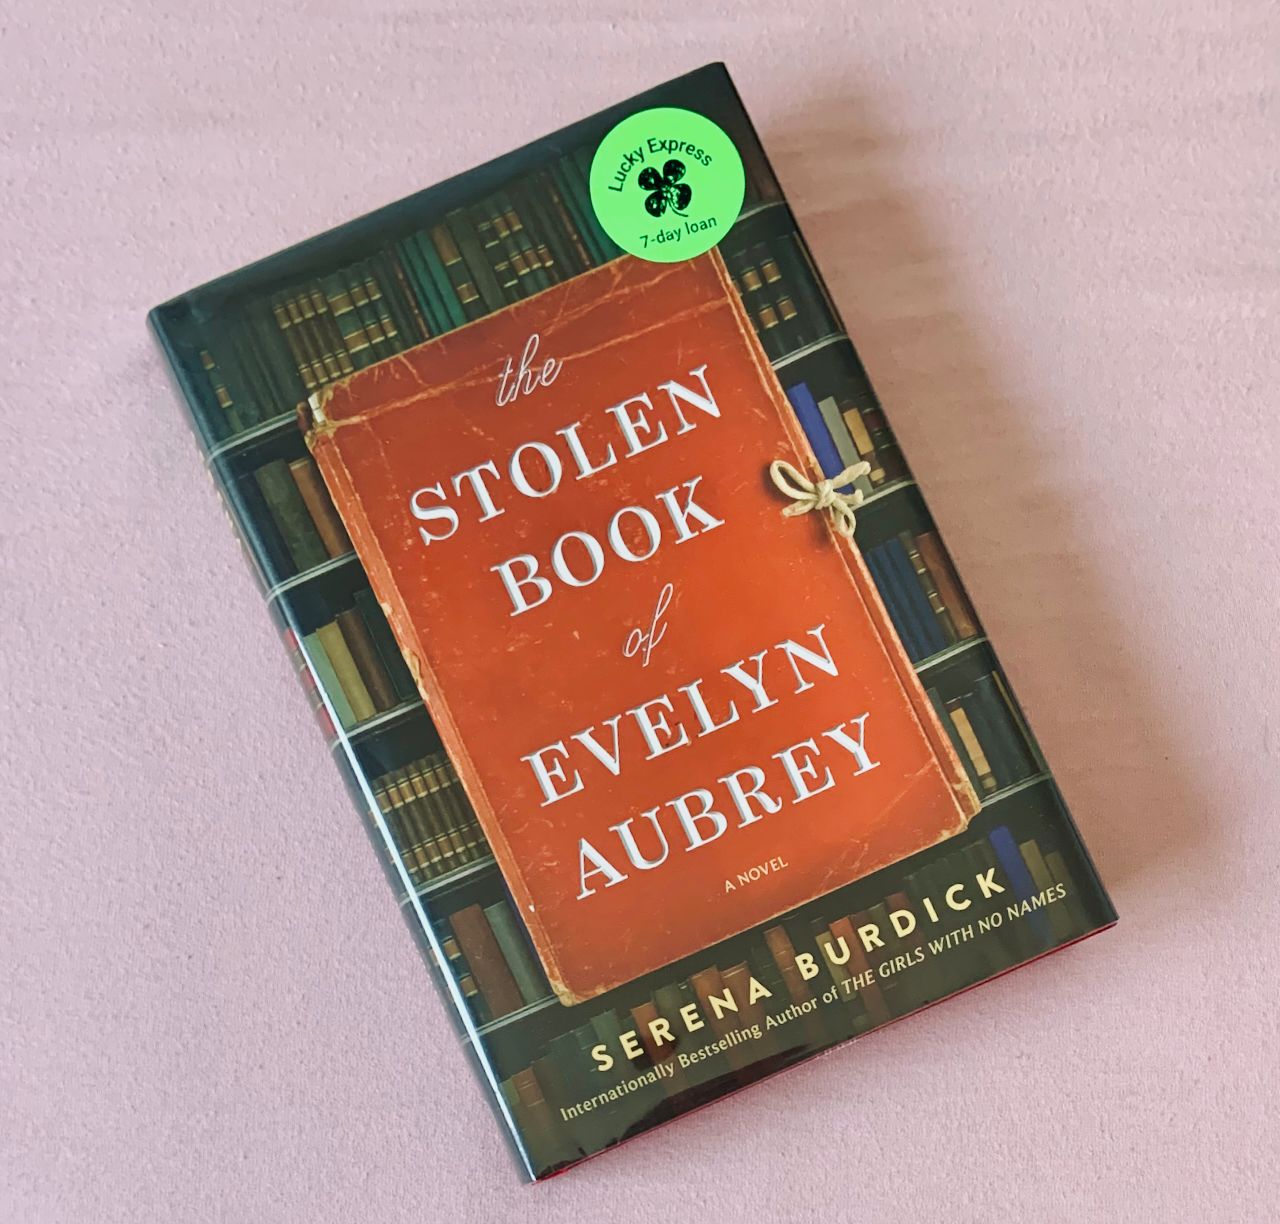 books you may love: The Stolen Book of Evelyn Aubrey by Serena Burdick